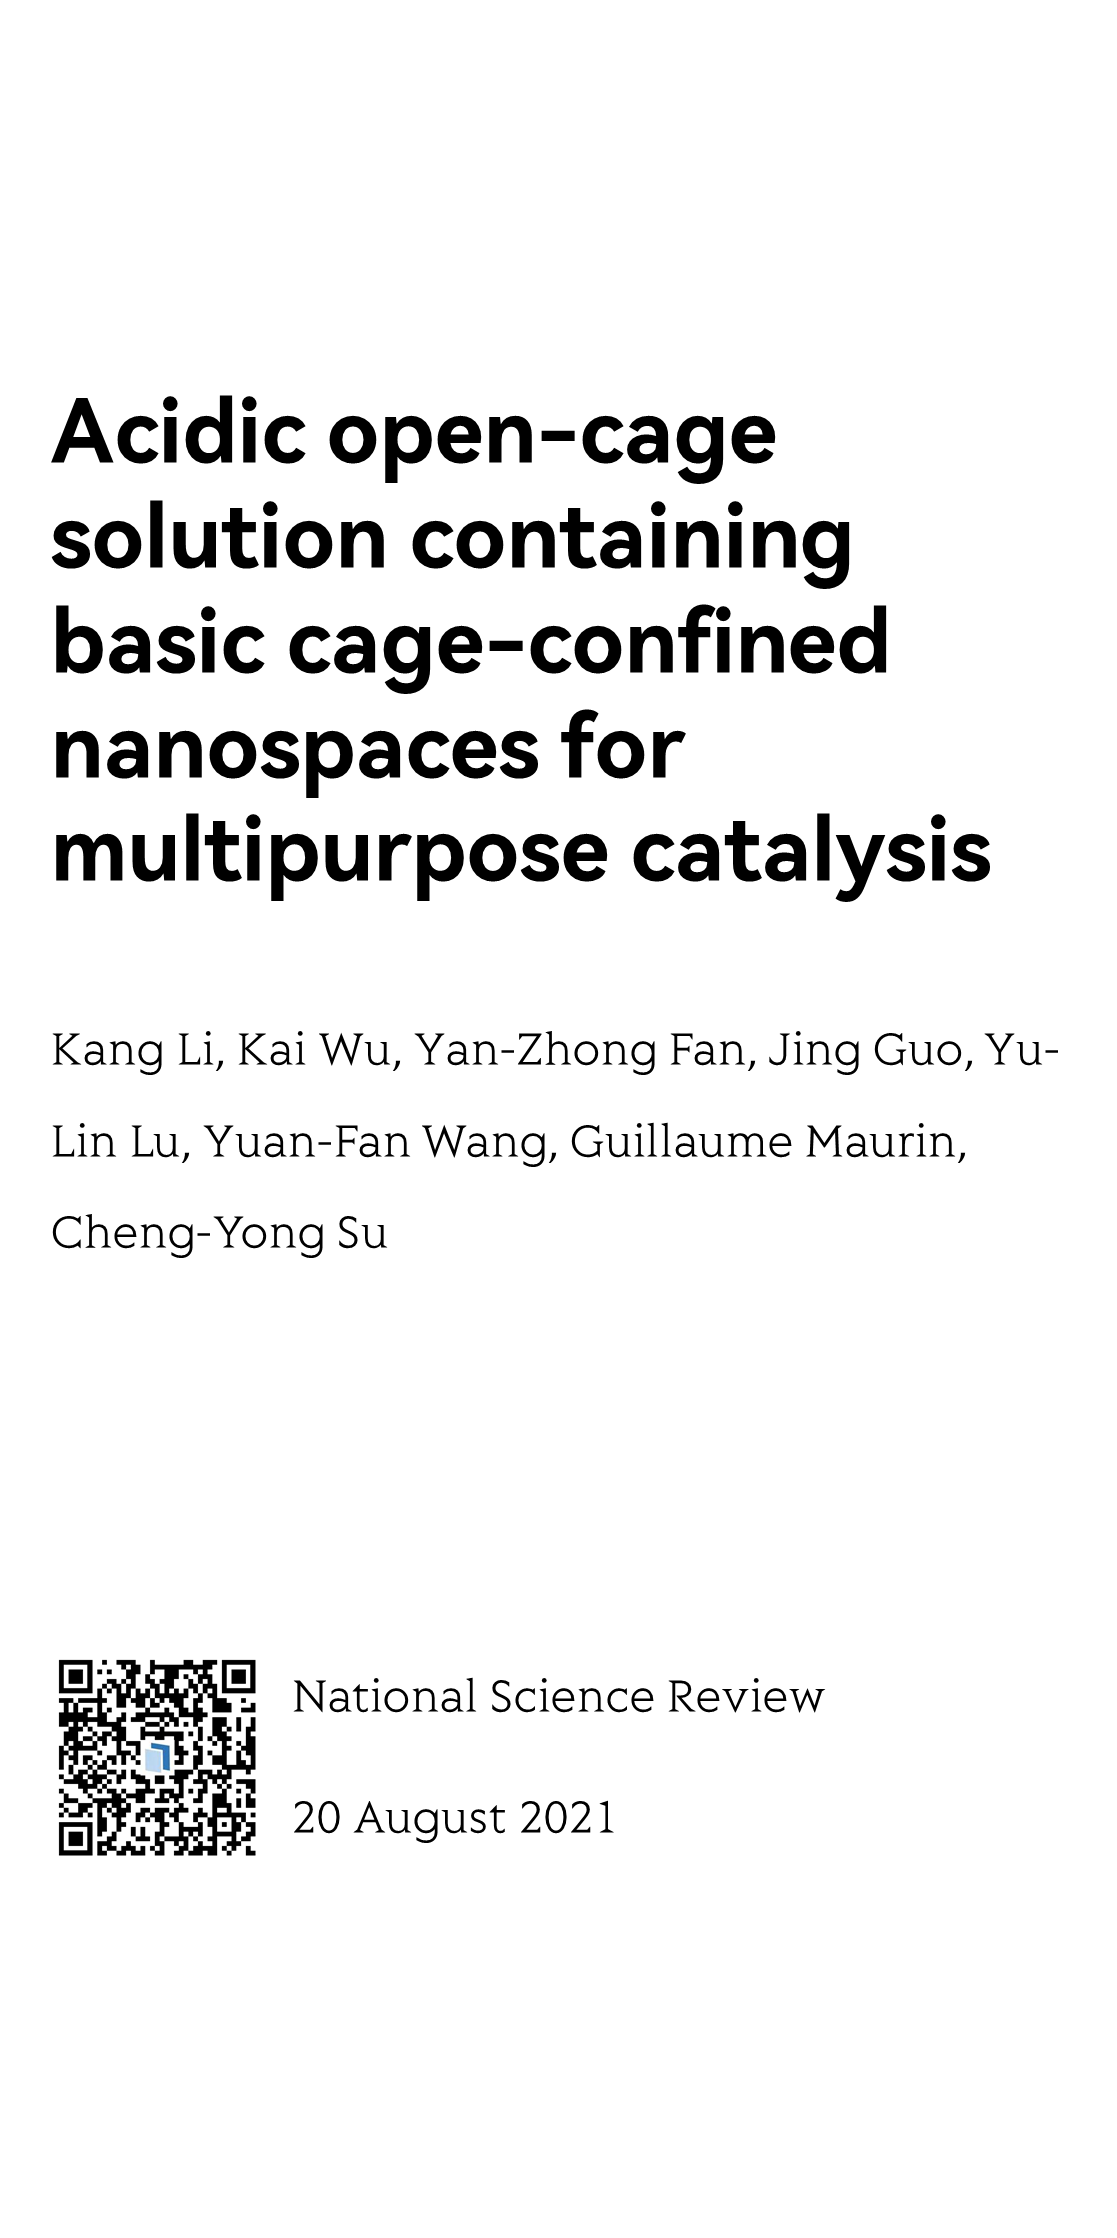 Acidic open-cage solution containing basic cage-confined nanospaces for multipurpose catalysis_1